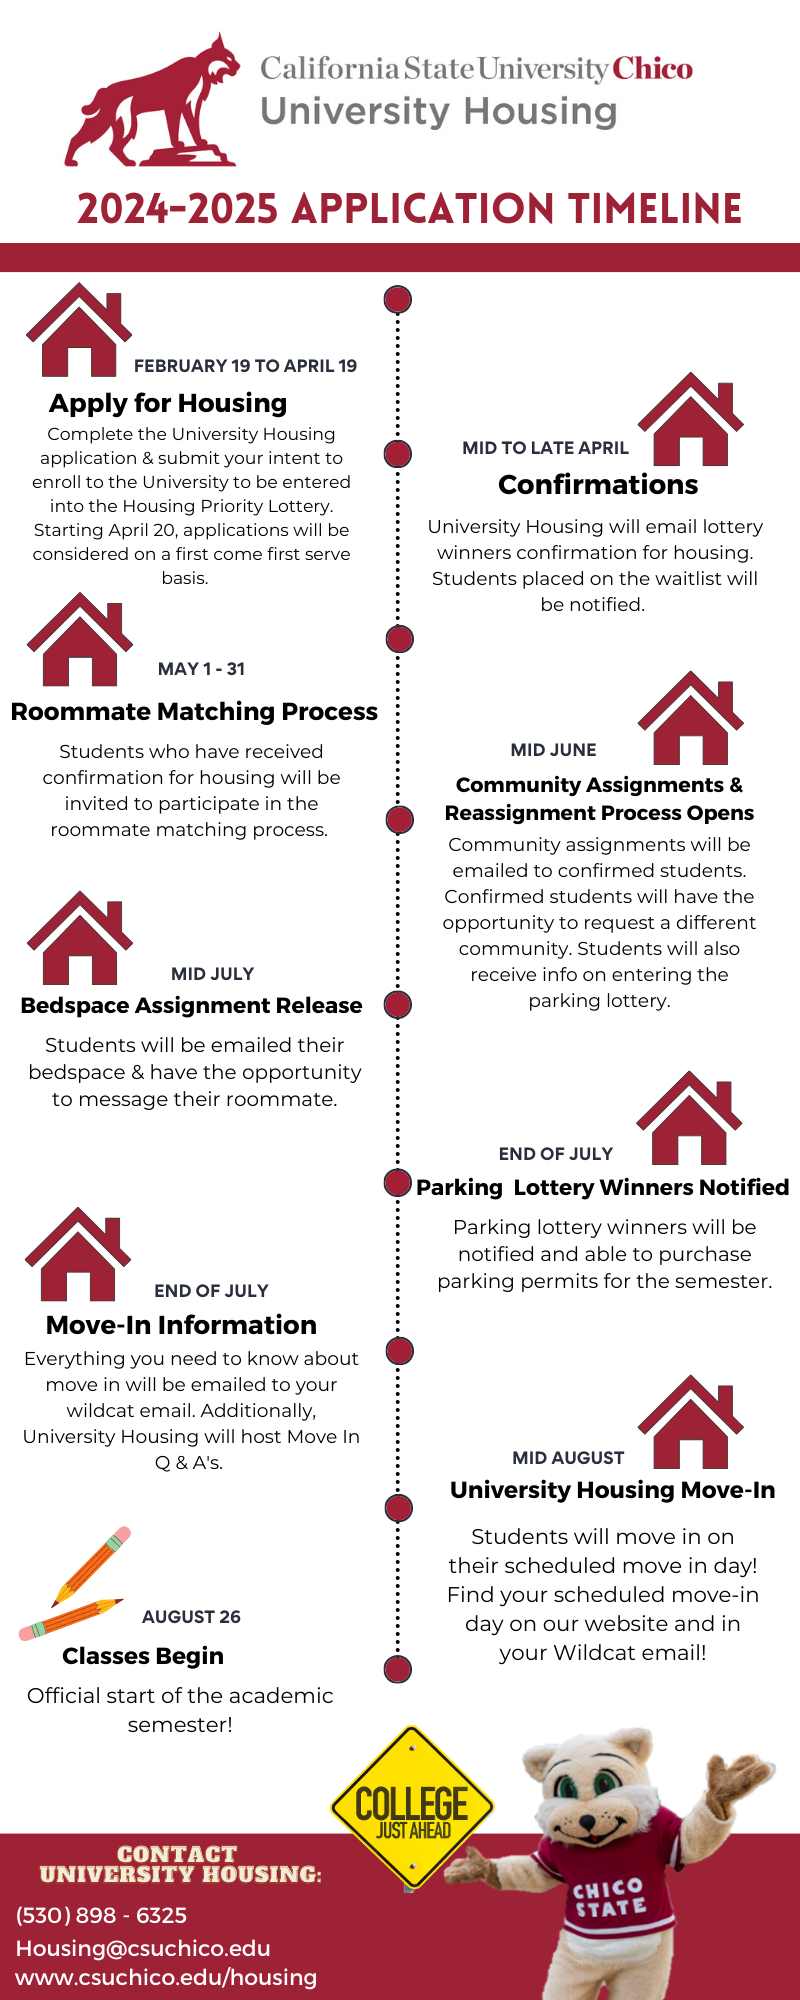 Fall 2023 housing application timeline. All information can also be found in PDF version found on this page.